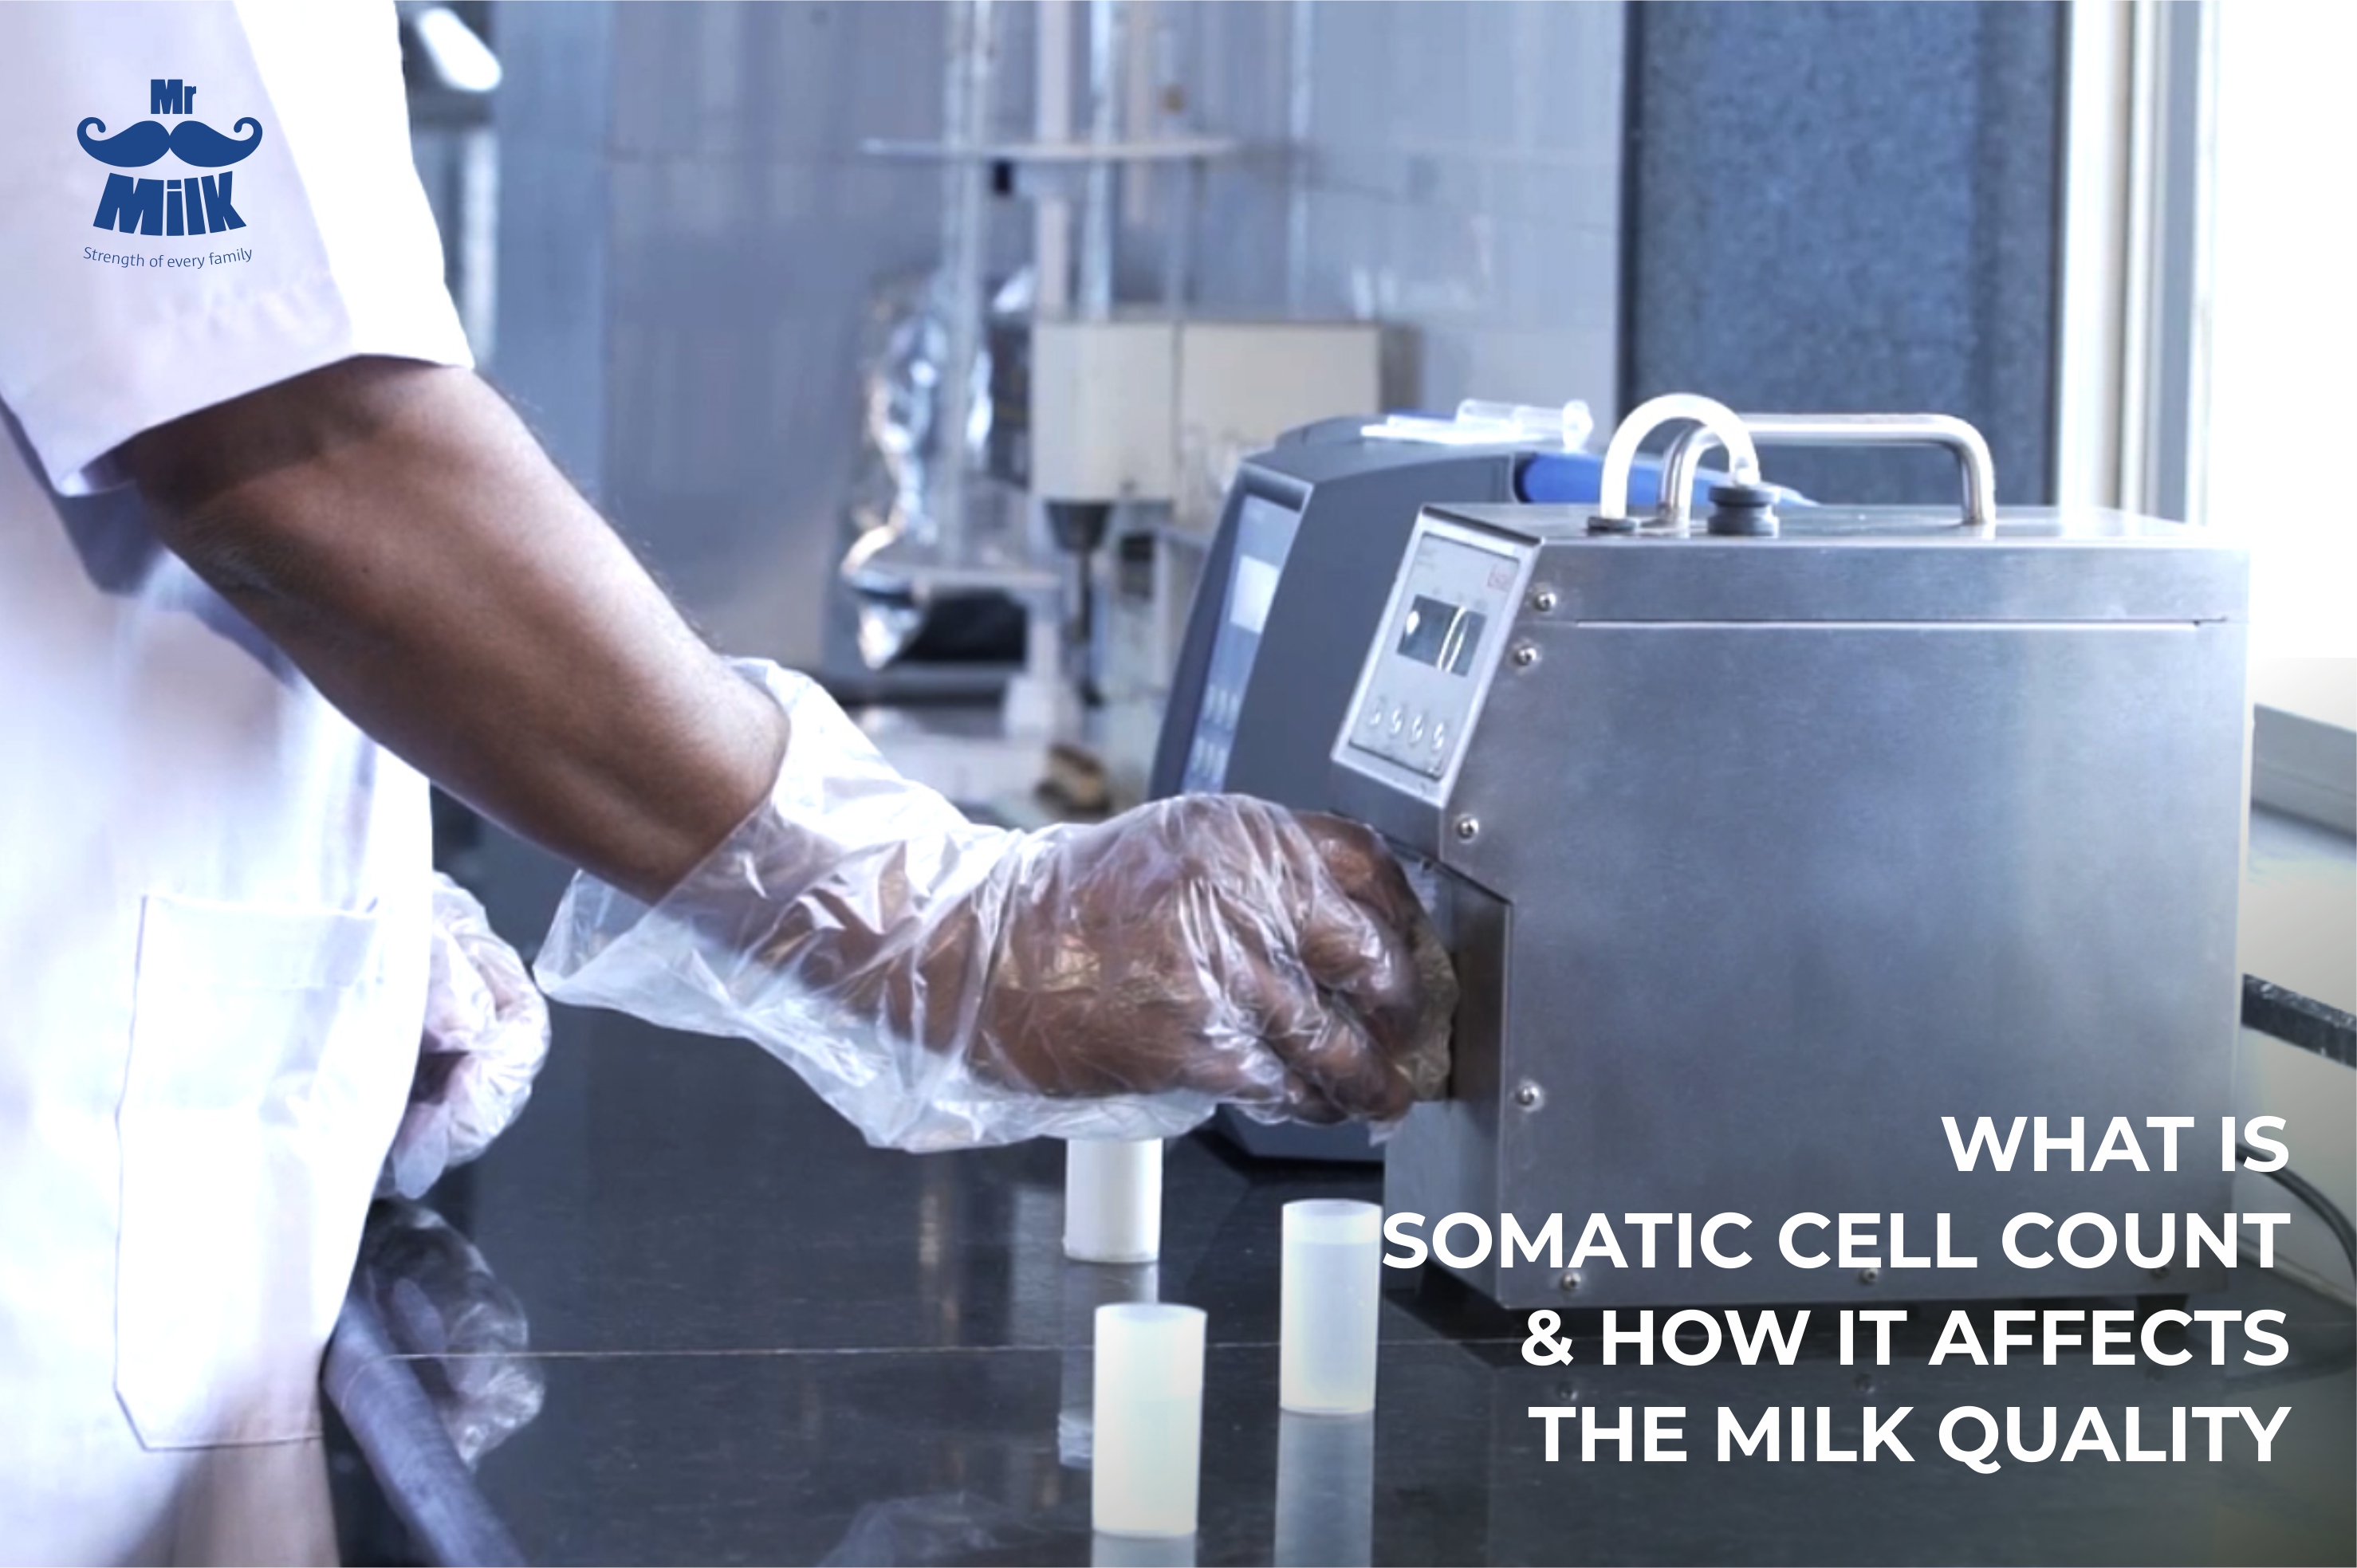 What is Somatic cell count & how it affects the milk quality